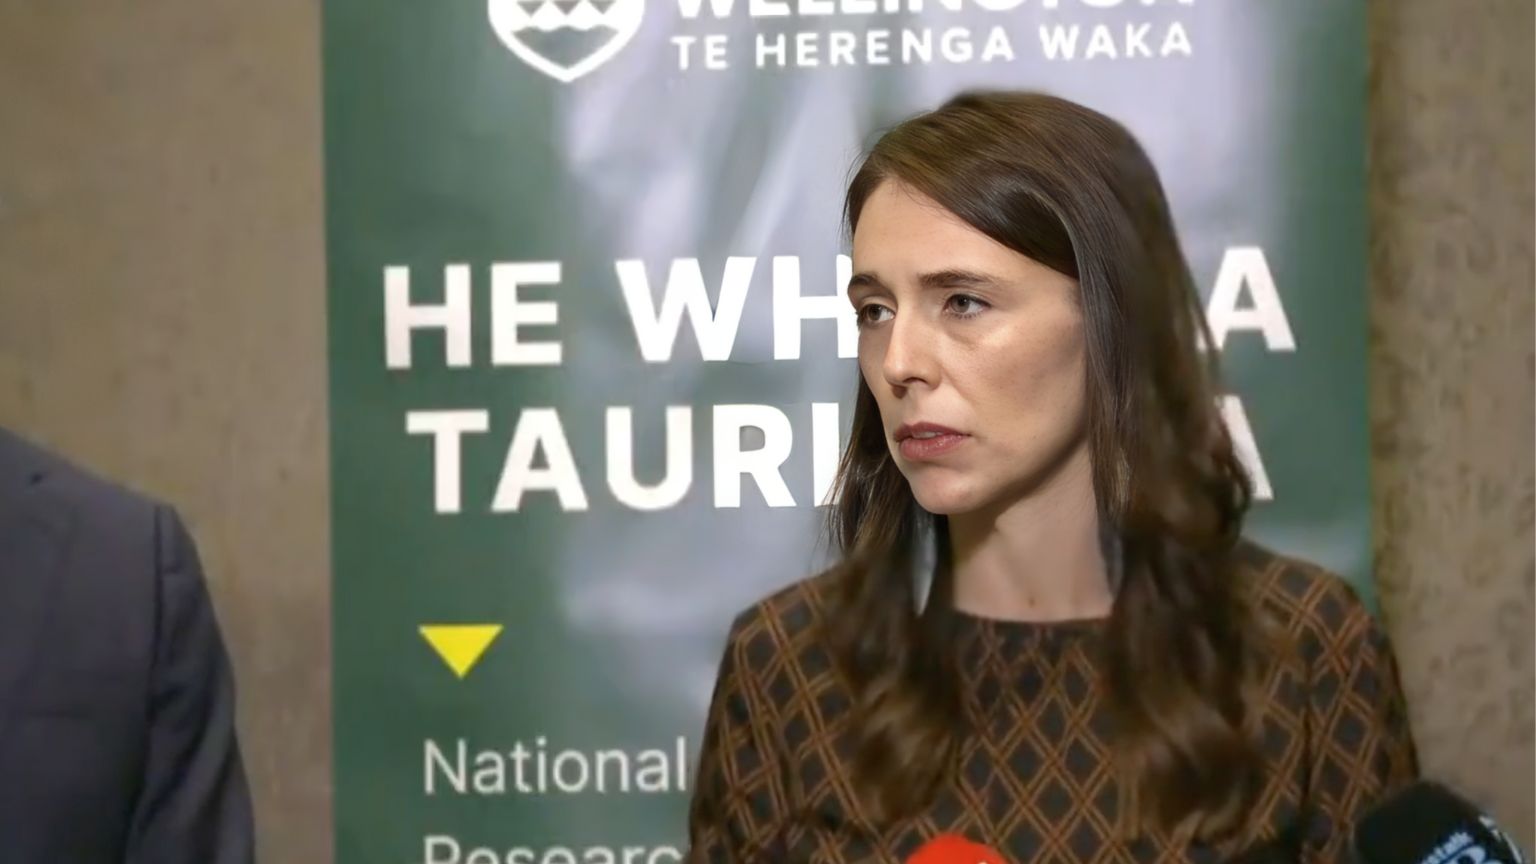 New Zealand says “misinformation” and Covid policies seen to be “infringing on rights” could fuel extremism